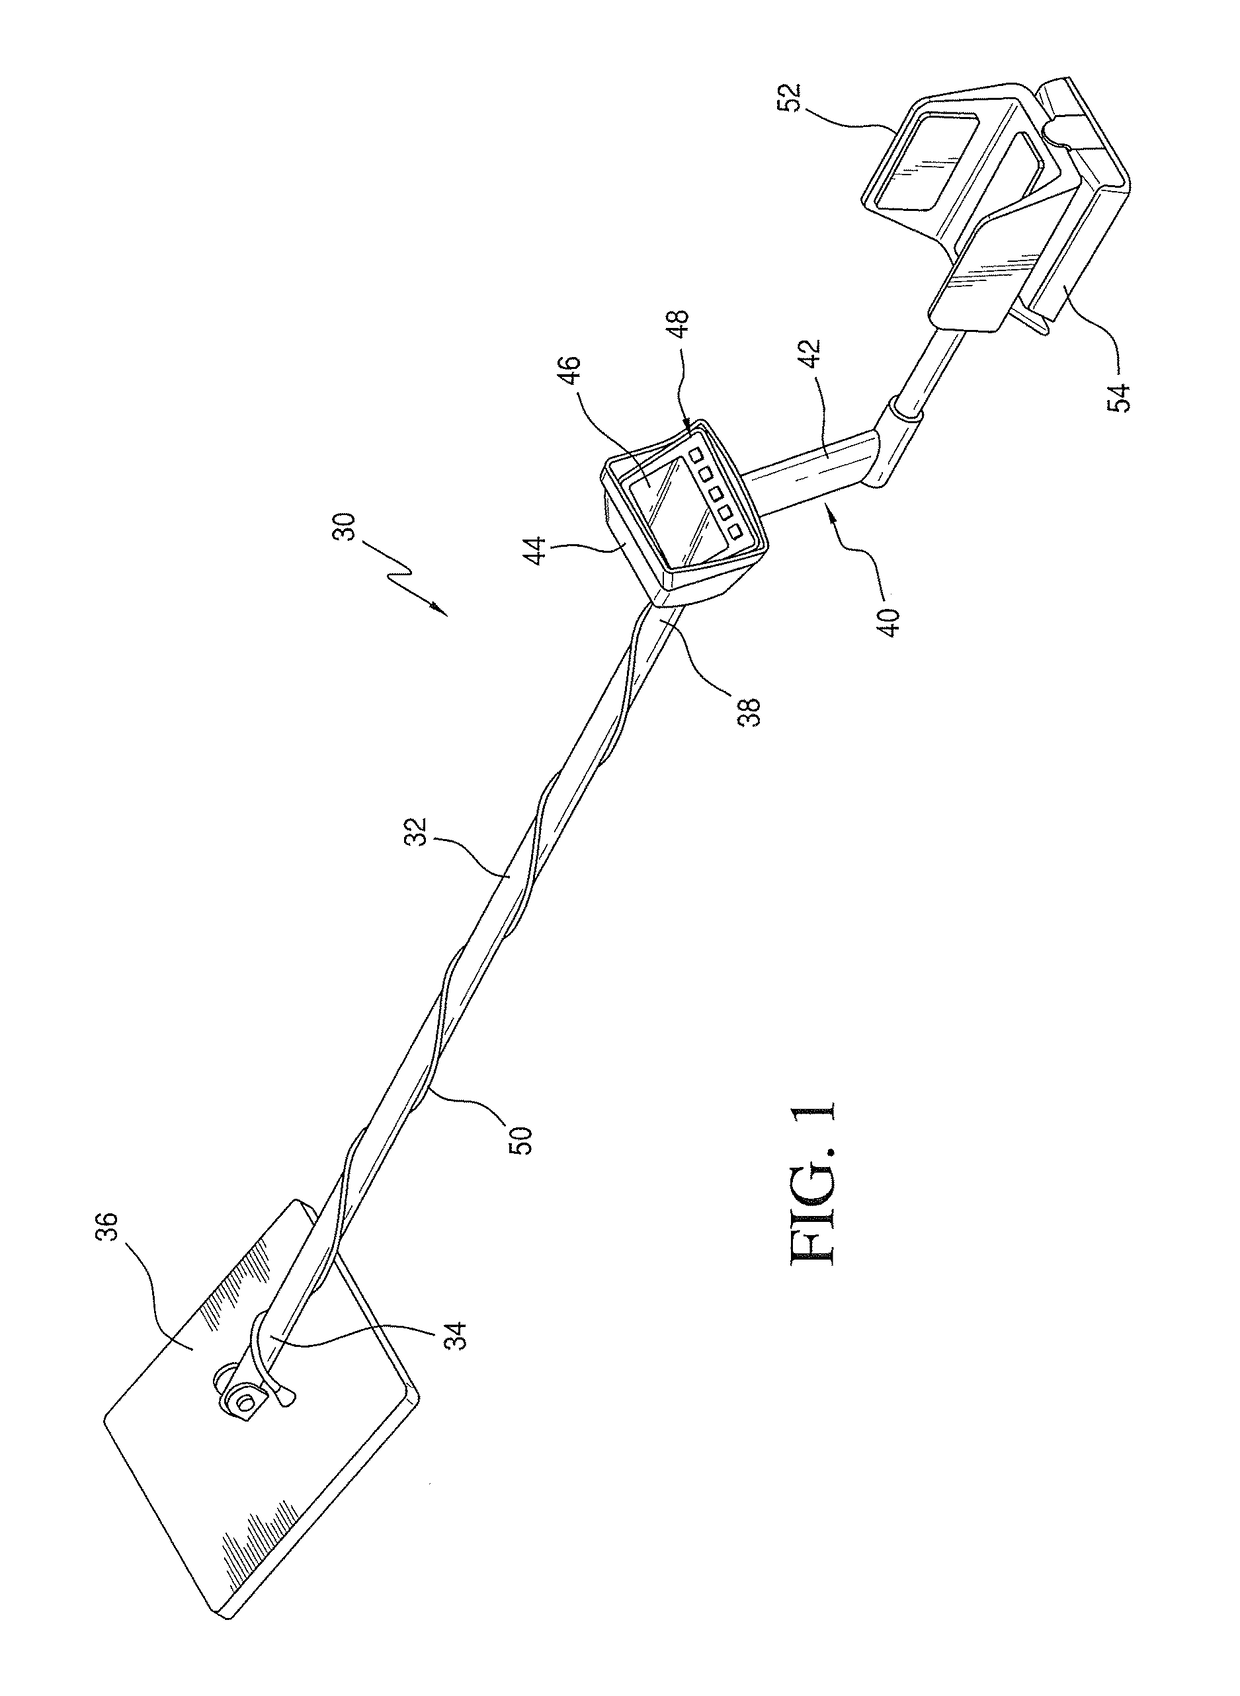 Metal object or feature detection apparatus and method